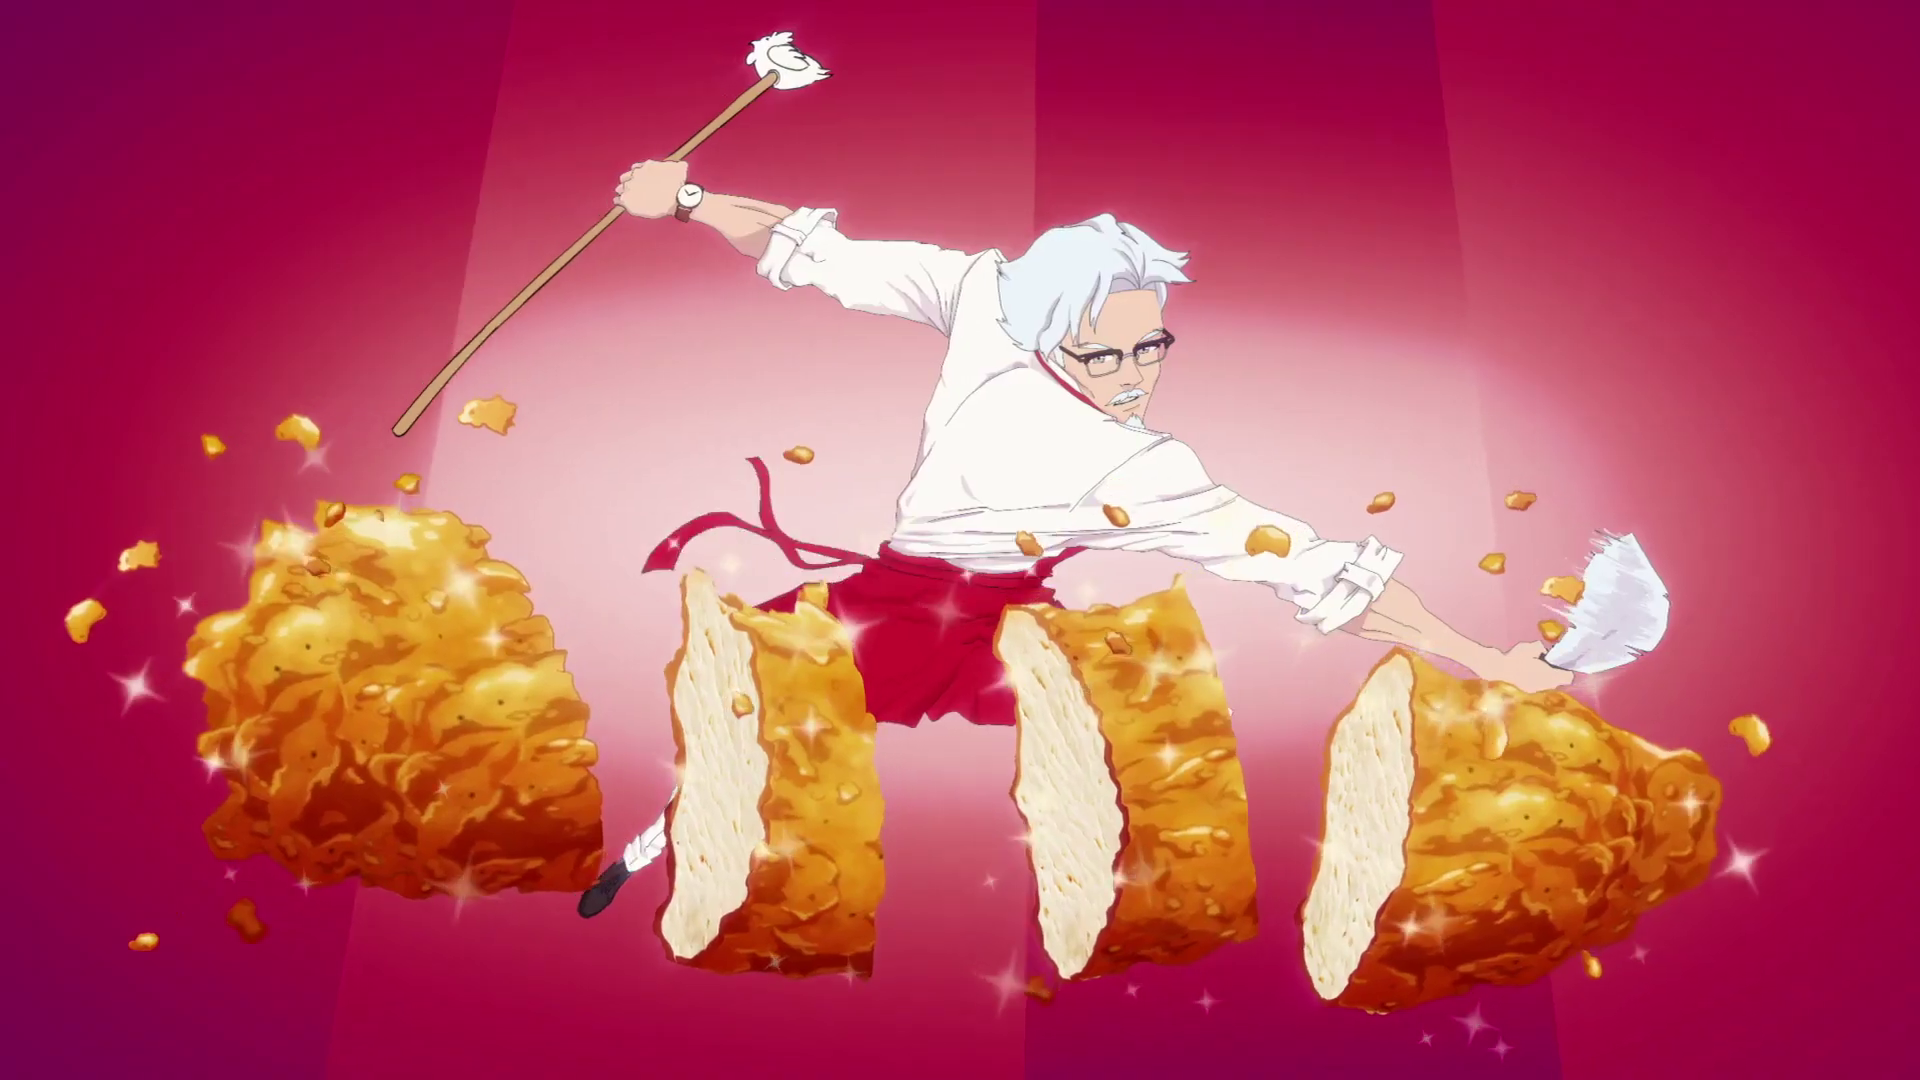 Yes, KFC Really Made a Game. And Yes, It Is a Dating Simulator Where You Can Date Colonel Sanders